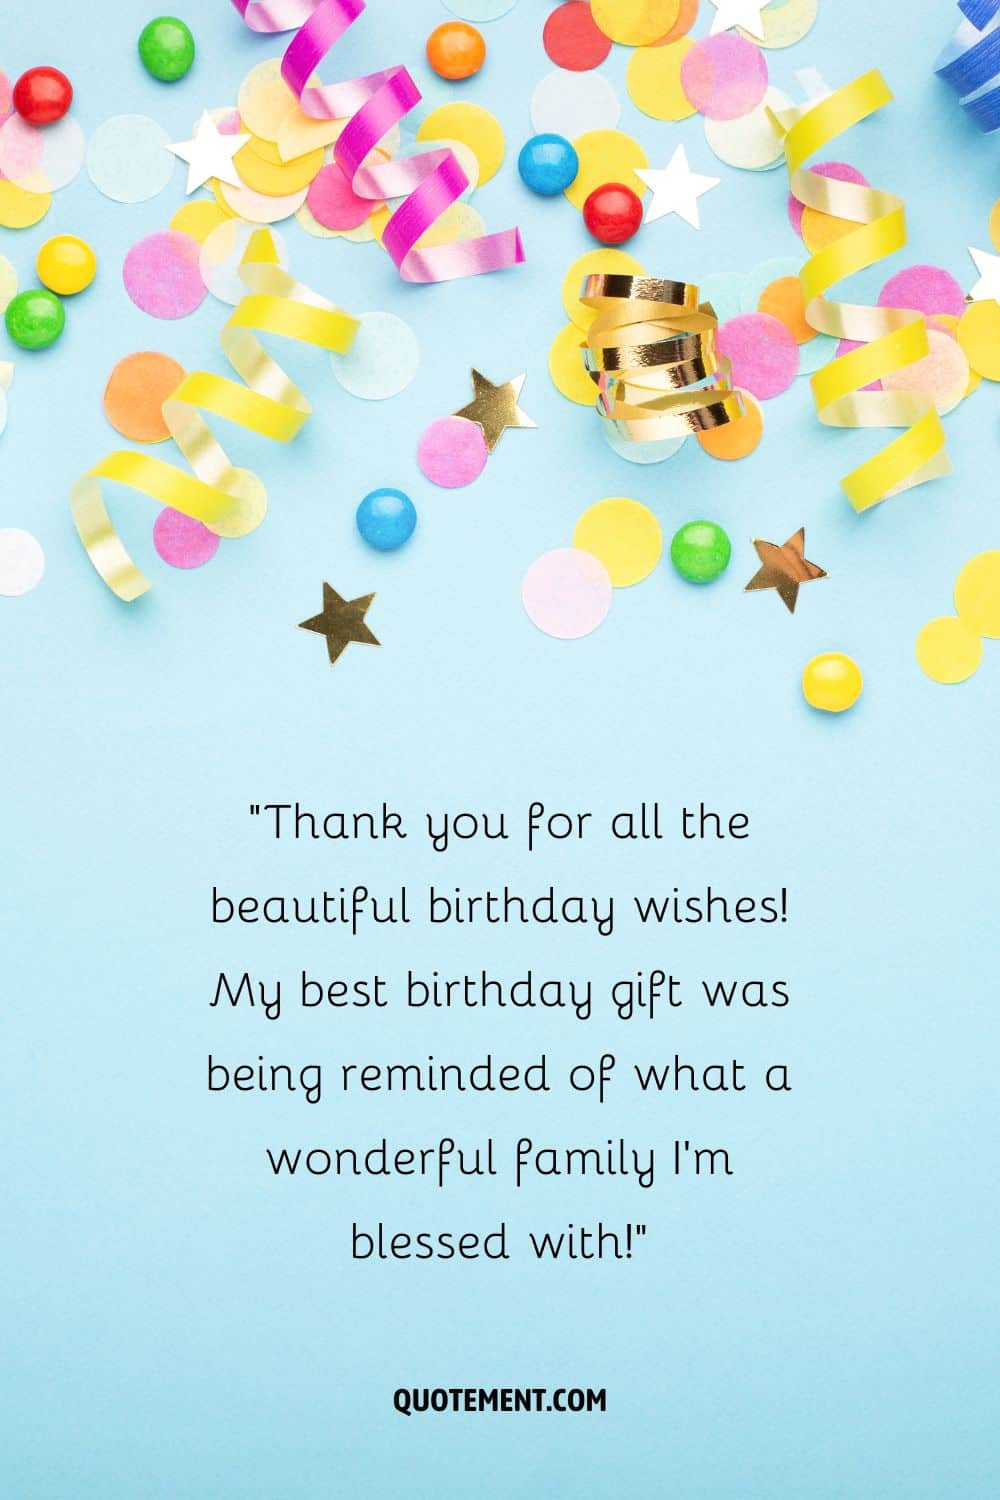 birthday party supply image representing thank you message for birthday wishes for family
